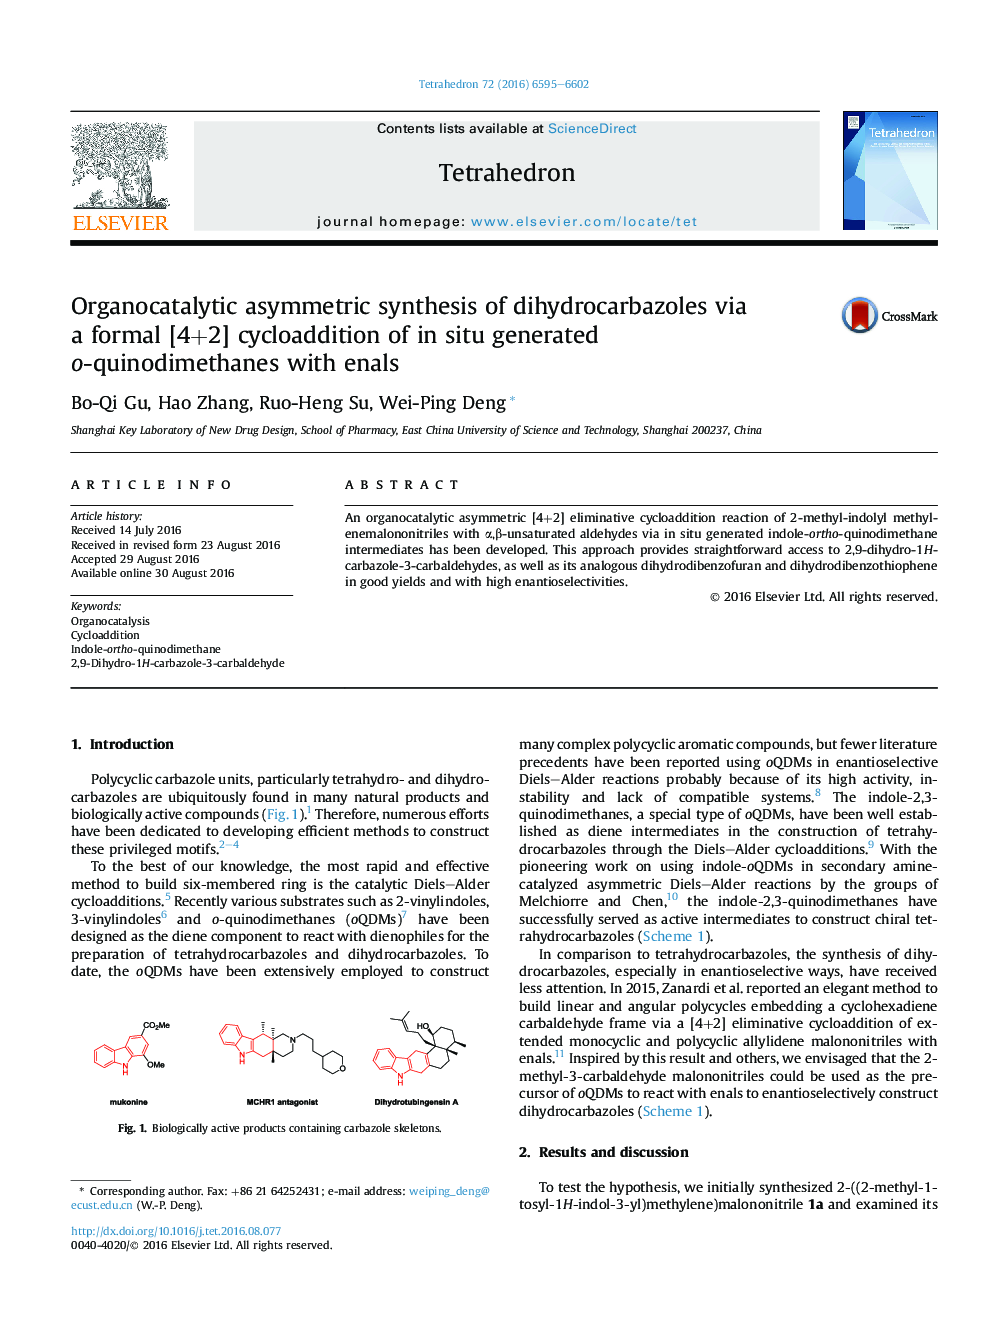 Organocatalytic asymmetric synthesis of dihydrocarbazoles via a formal [4+2] cycloaddition of in situ generated o-quinodimethanes with enals